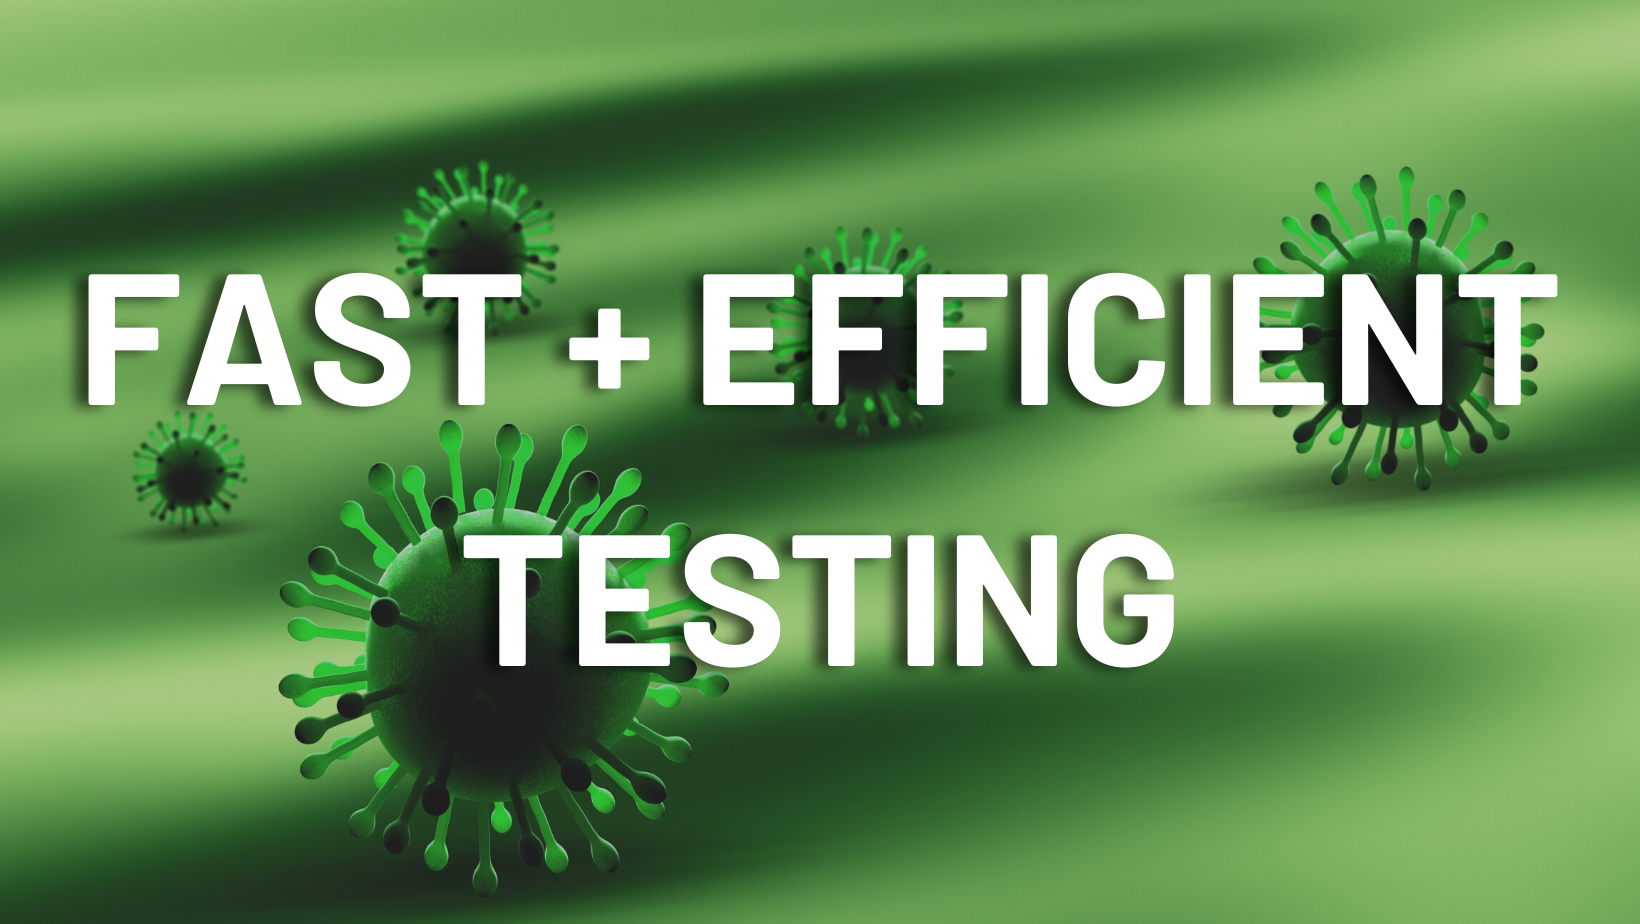 A green background with a virus and the words `` fast + efficient testing ''.